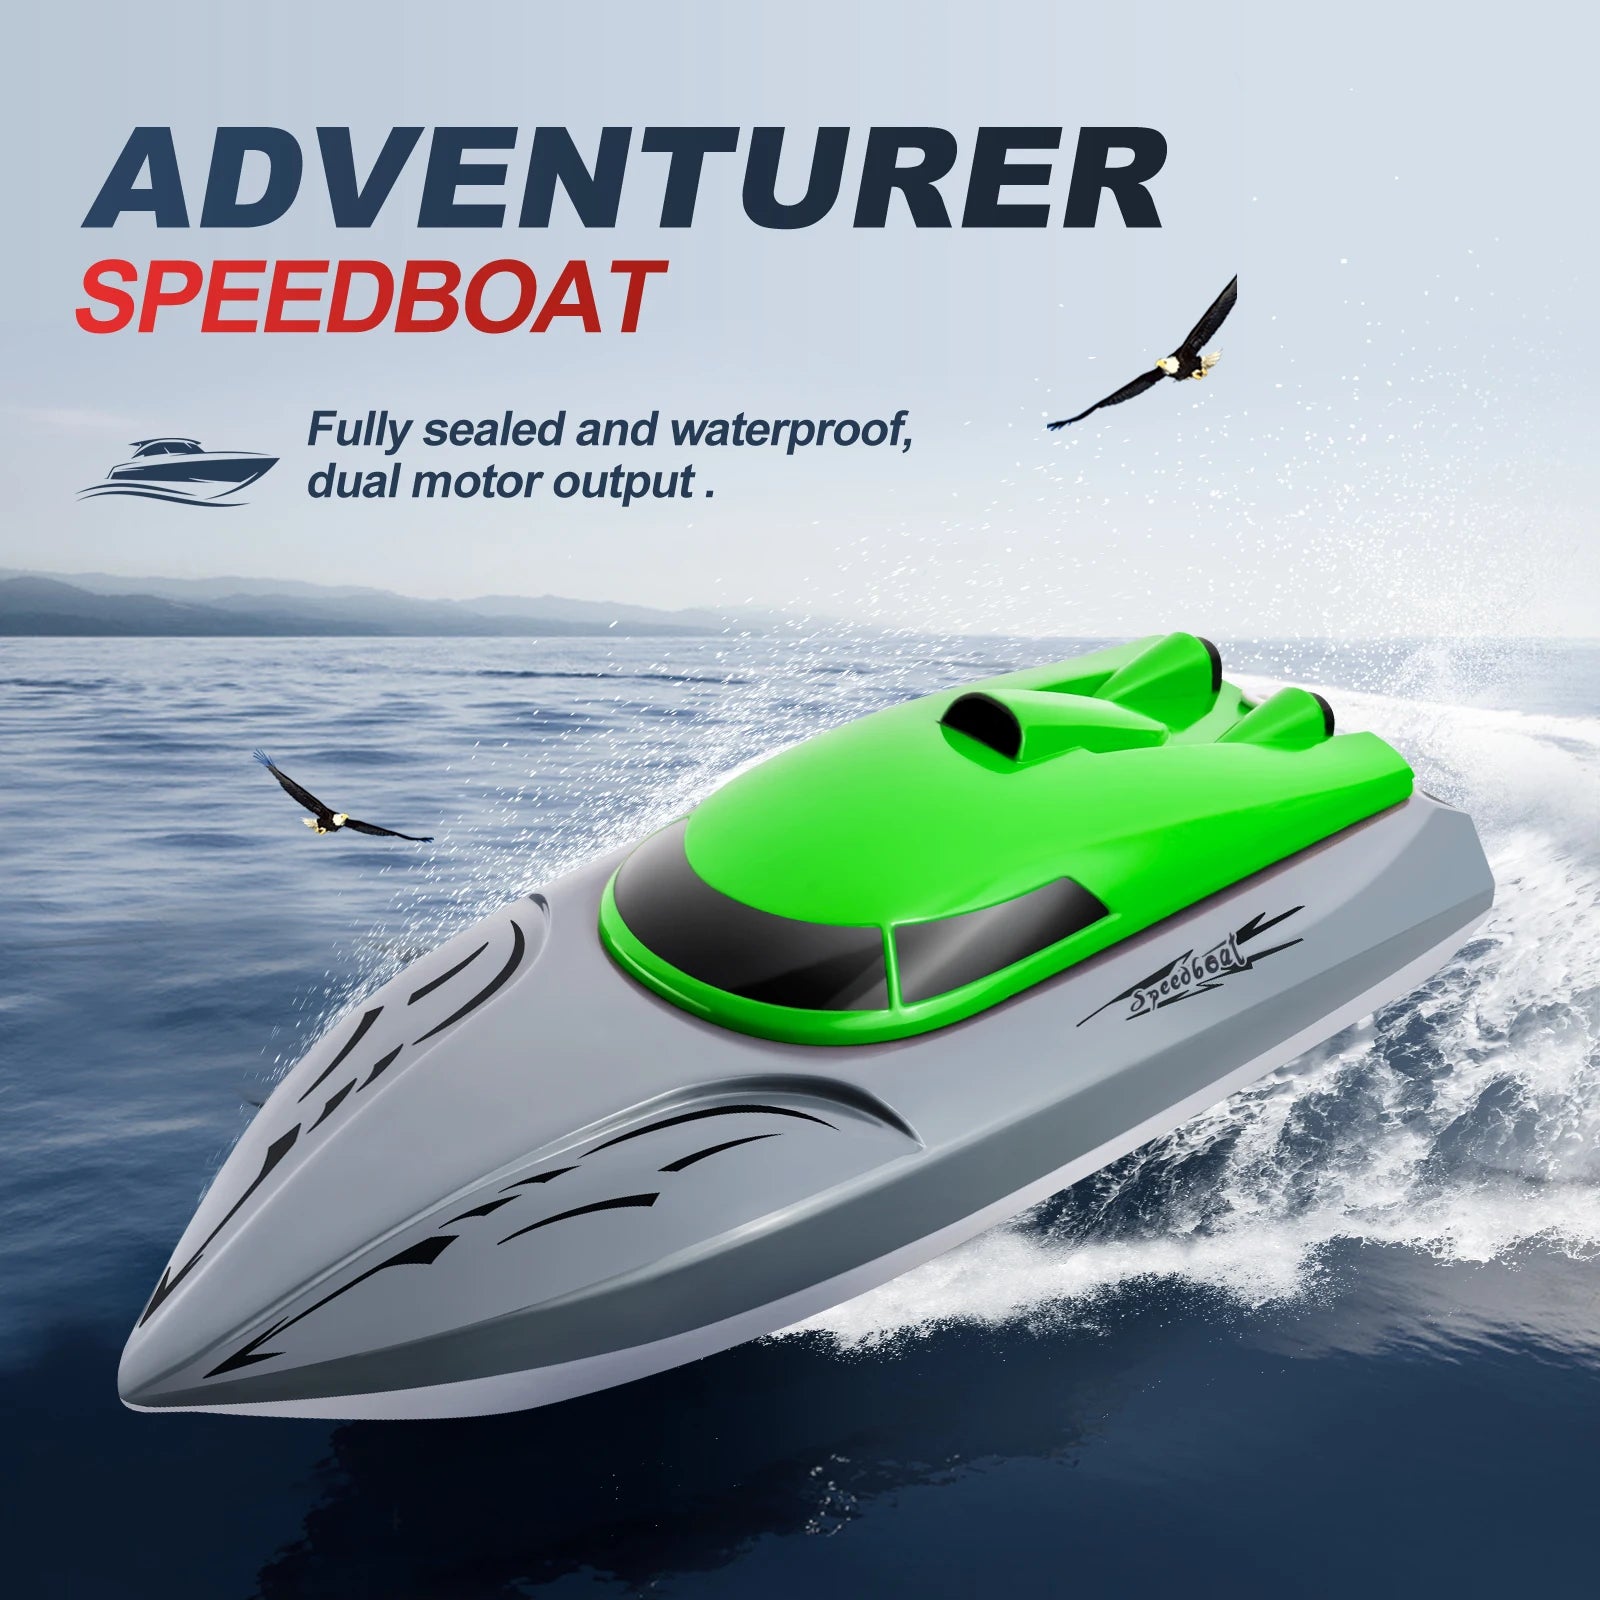 Rc Boat, ADVENTURER SPEEDBOAT Fully sealed and waterproof; dual motor output _